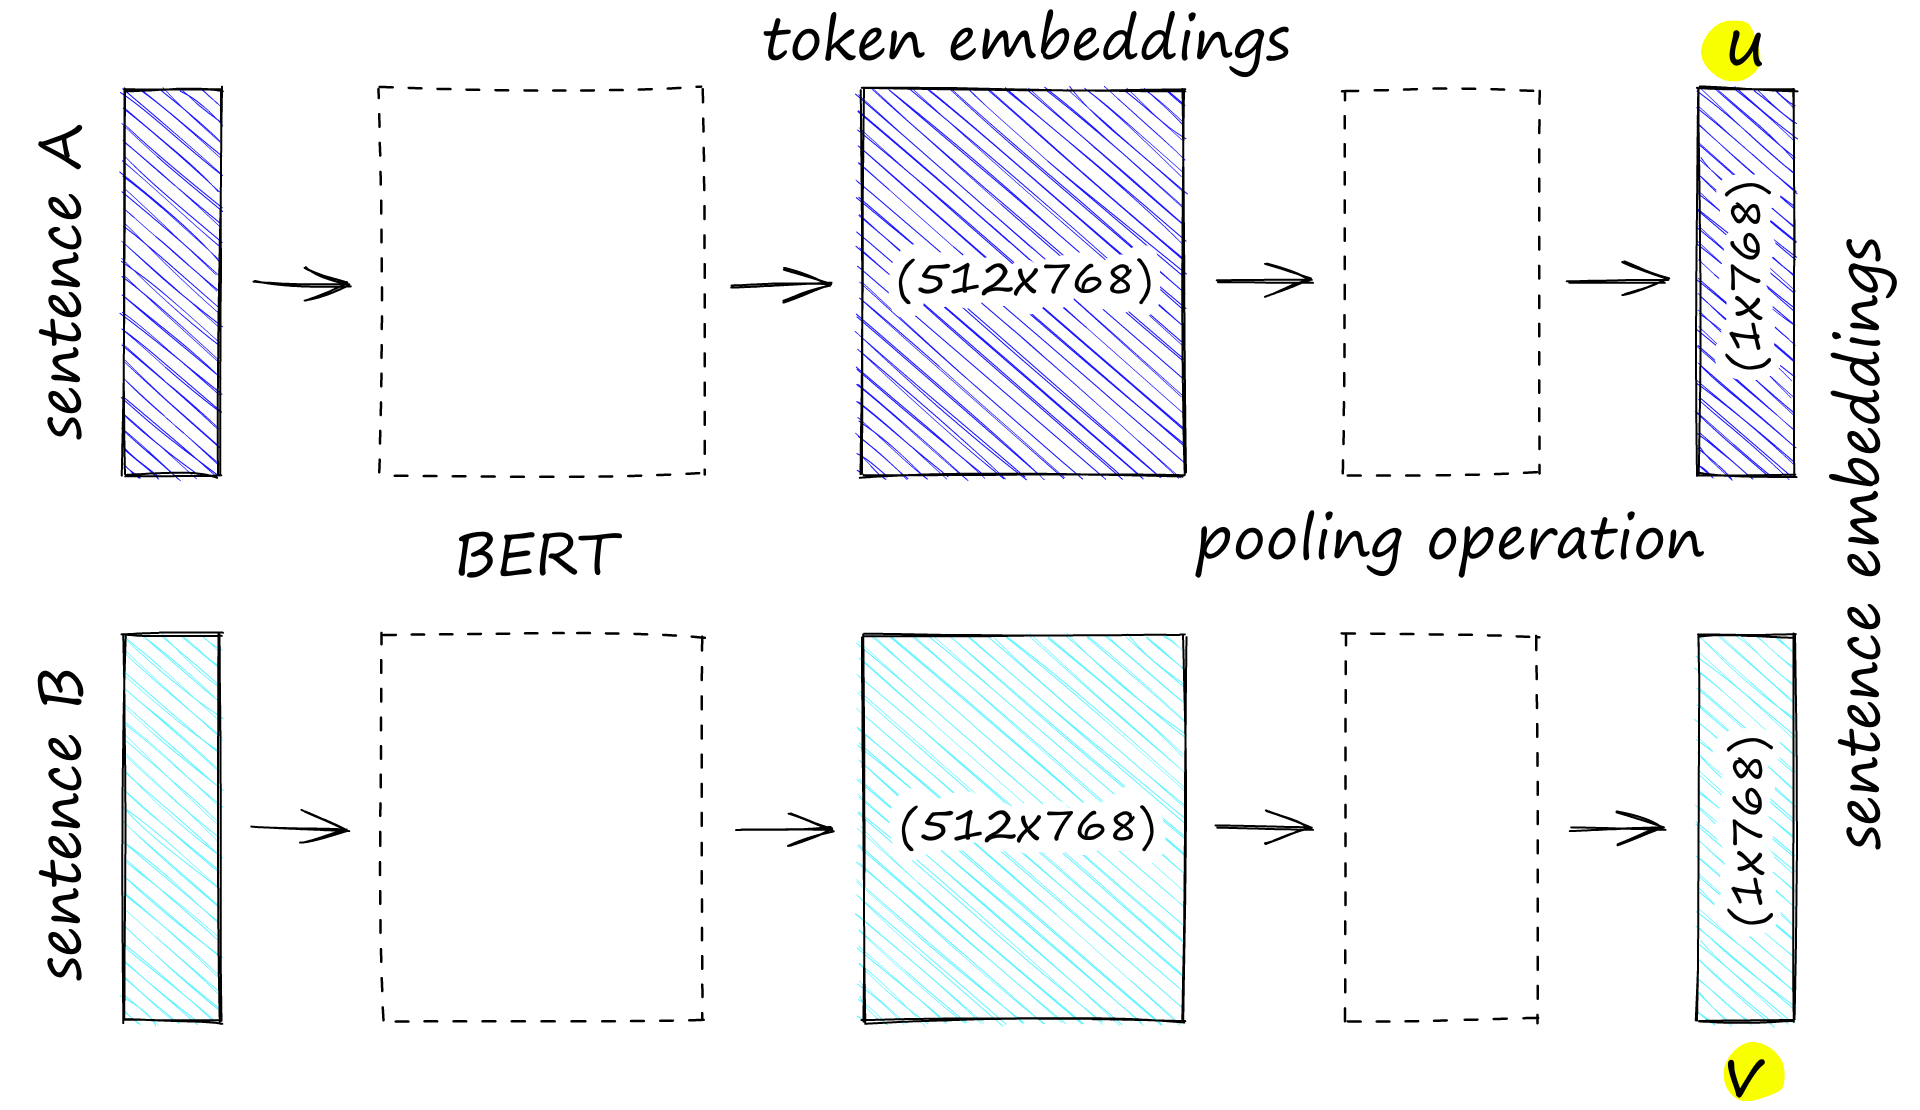 An SBERT model applied to a sentence pair sentence A and sentence B. Note that the BERT model outputs token embeddings (consisting of 512 768-dimensional vectors). We then compress that data into a single 768-dimensional sentence vector using a pooling function.